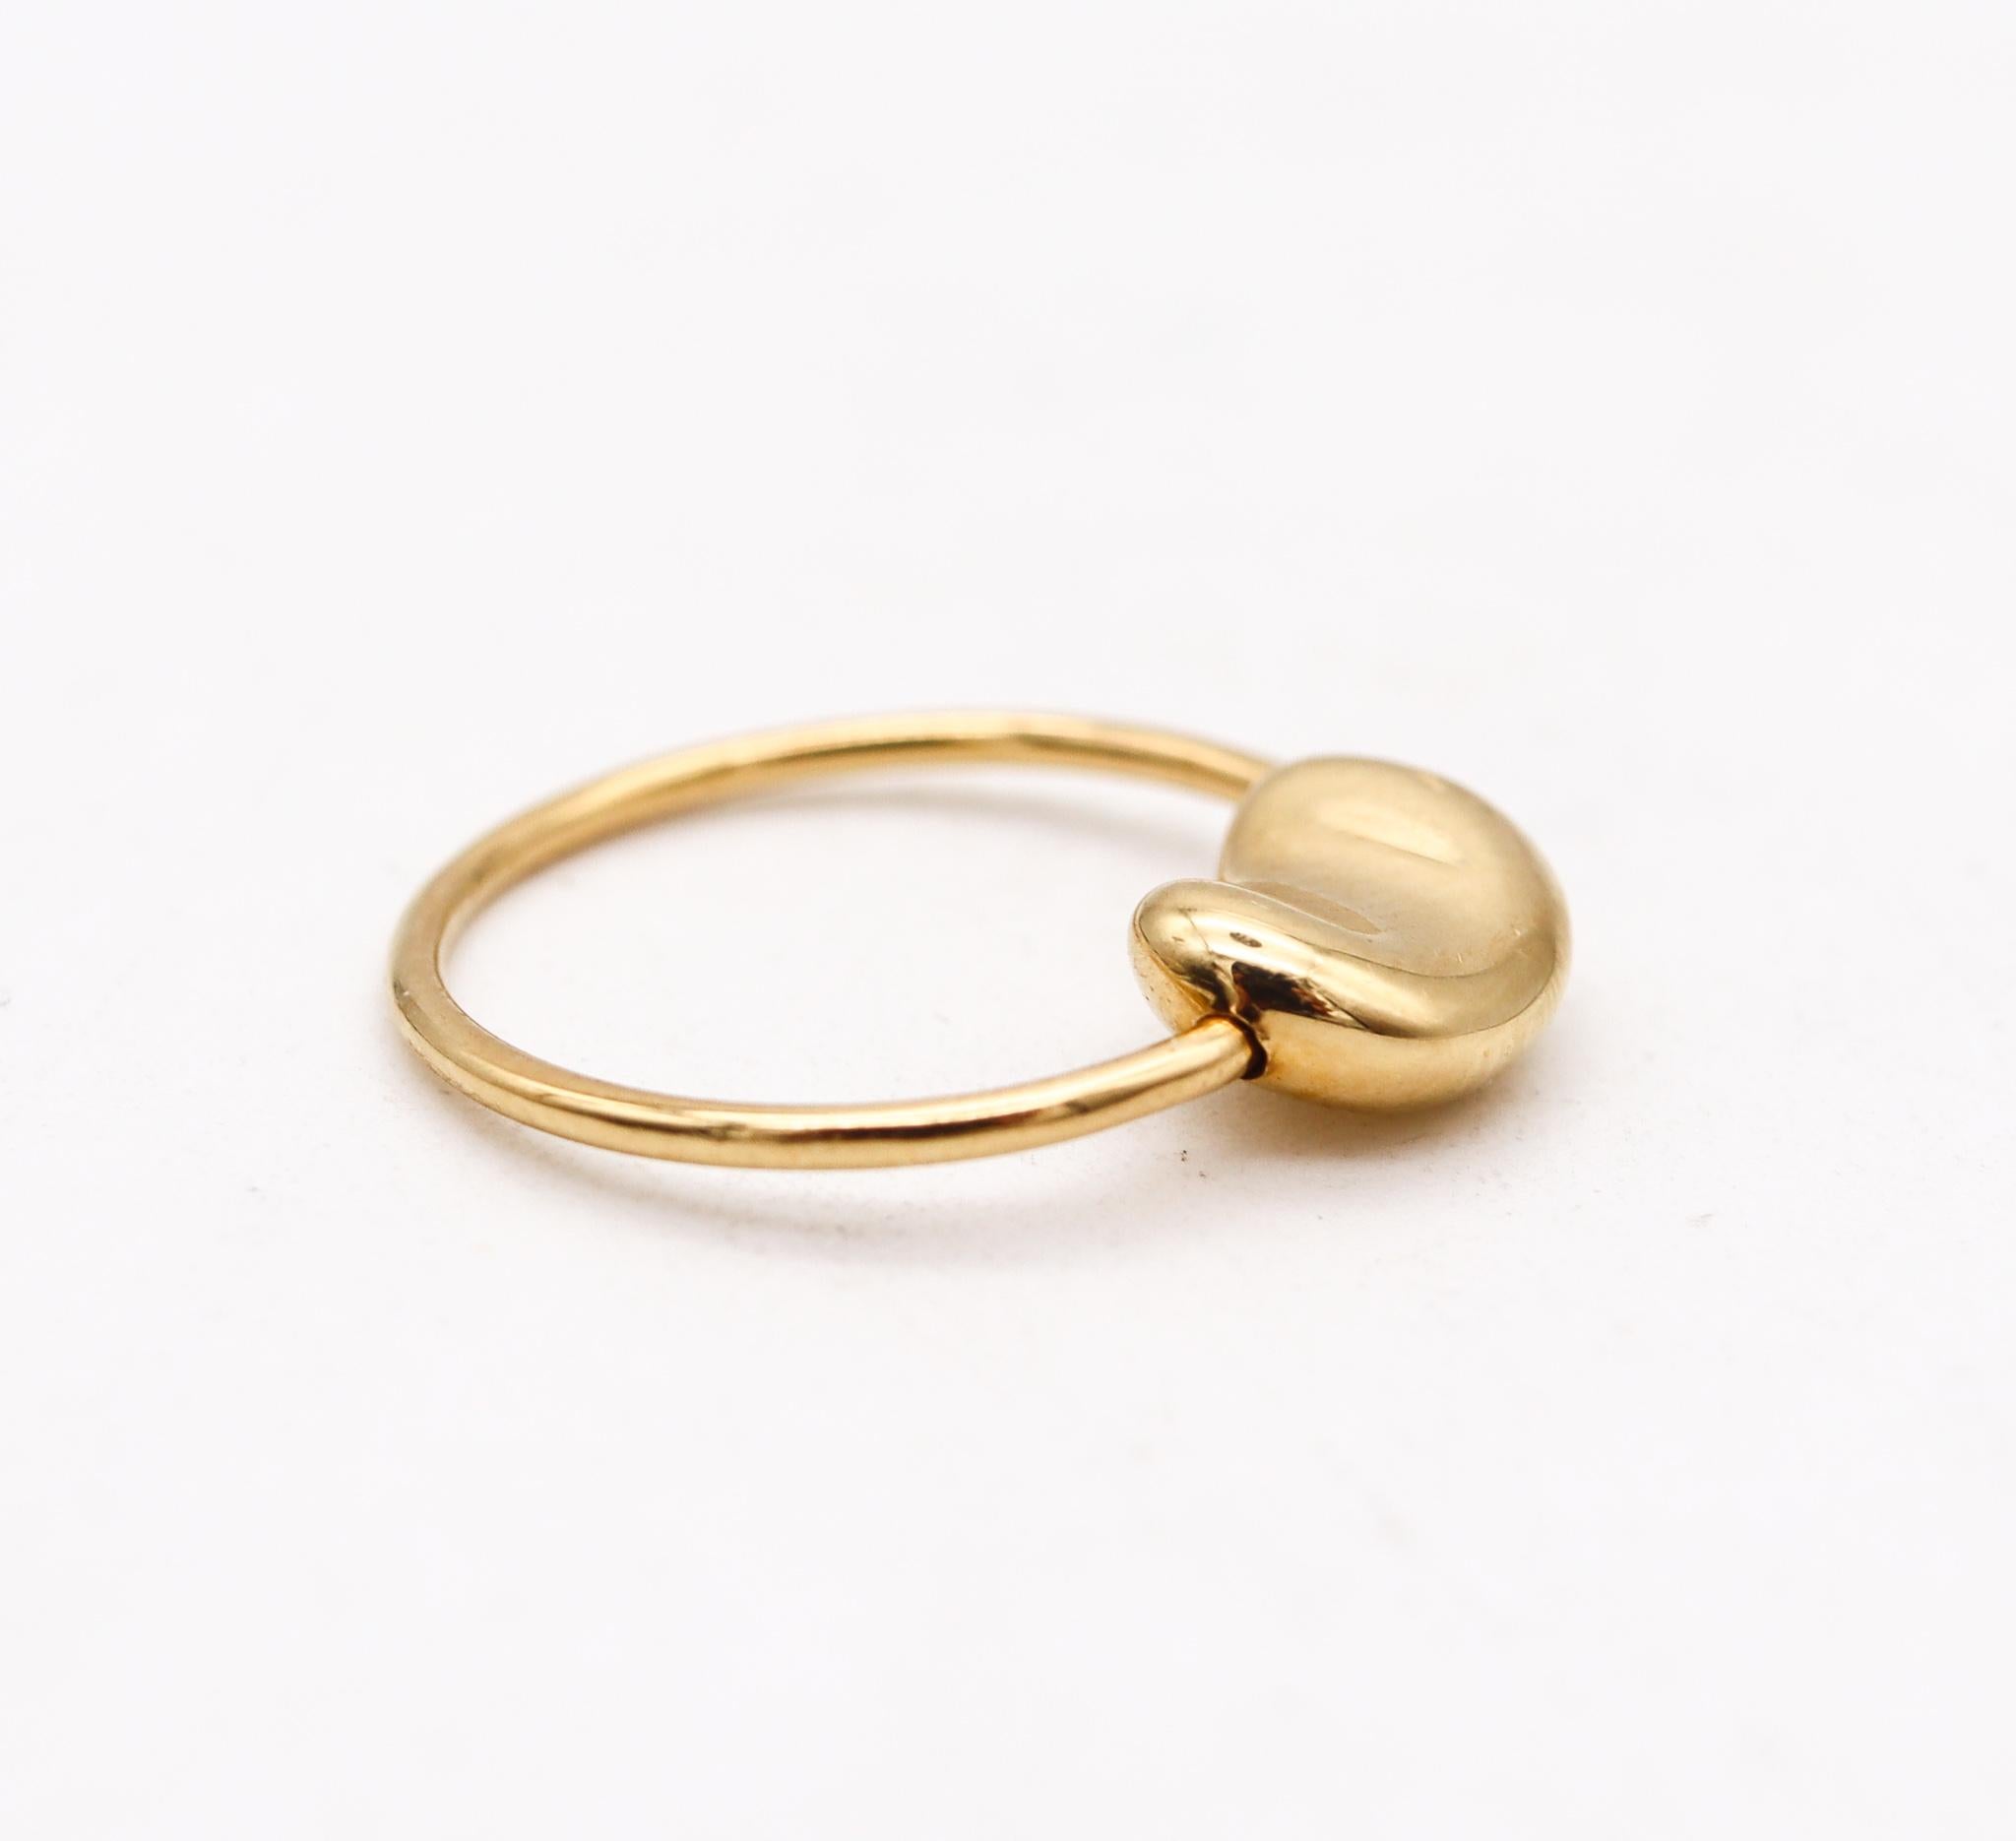 Modernist Tiffany & Co 1977 Elsa Peretti Rare Small Kinetic Bean Ring in 18Kt Yellow Gold